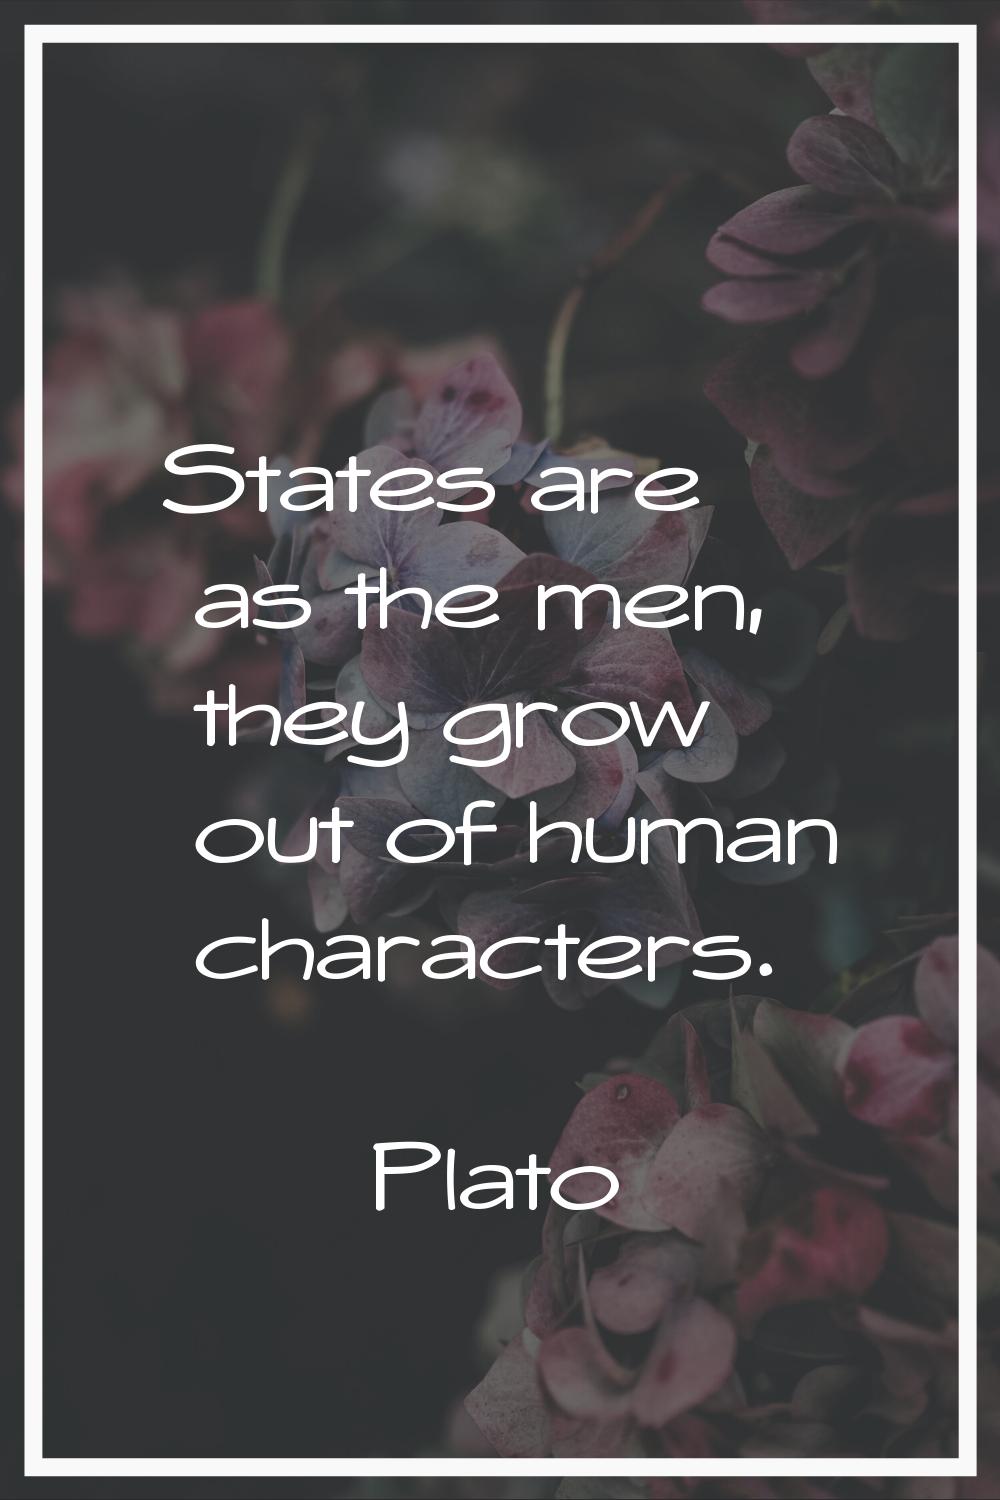 States are as the men, they grow out of human characters.